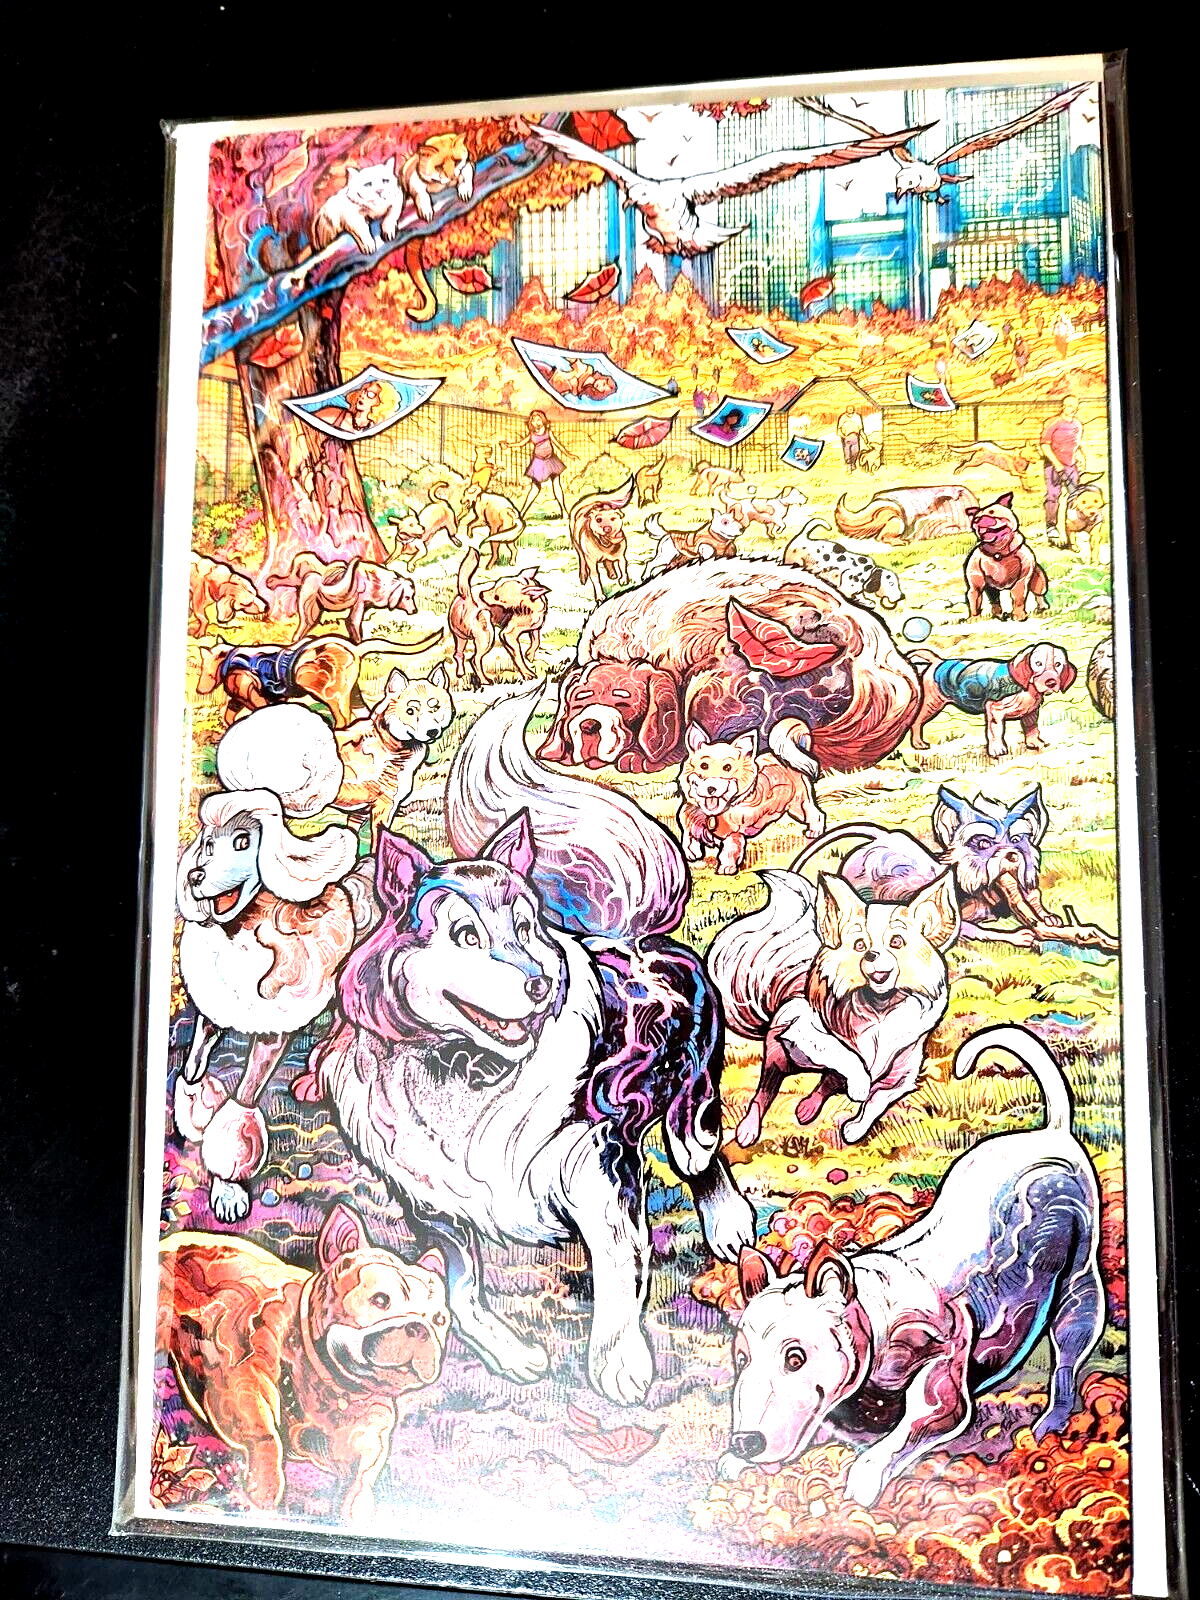 Primary image for Stray Dogs Dog Days 1 vincenzo riccardi virgin comic book carnivore comics new